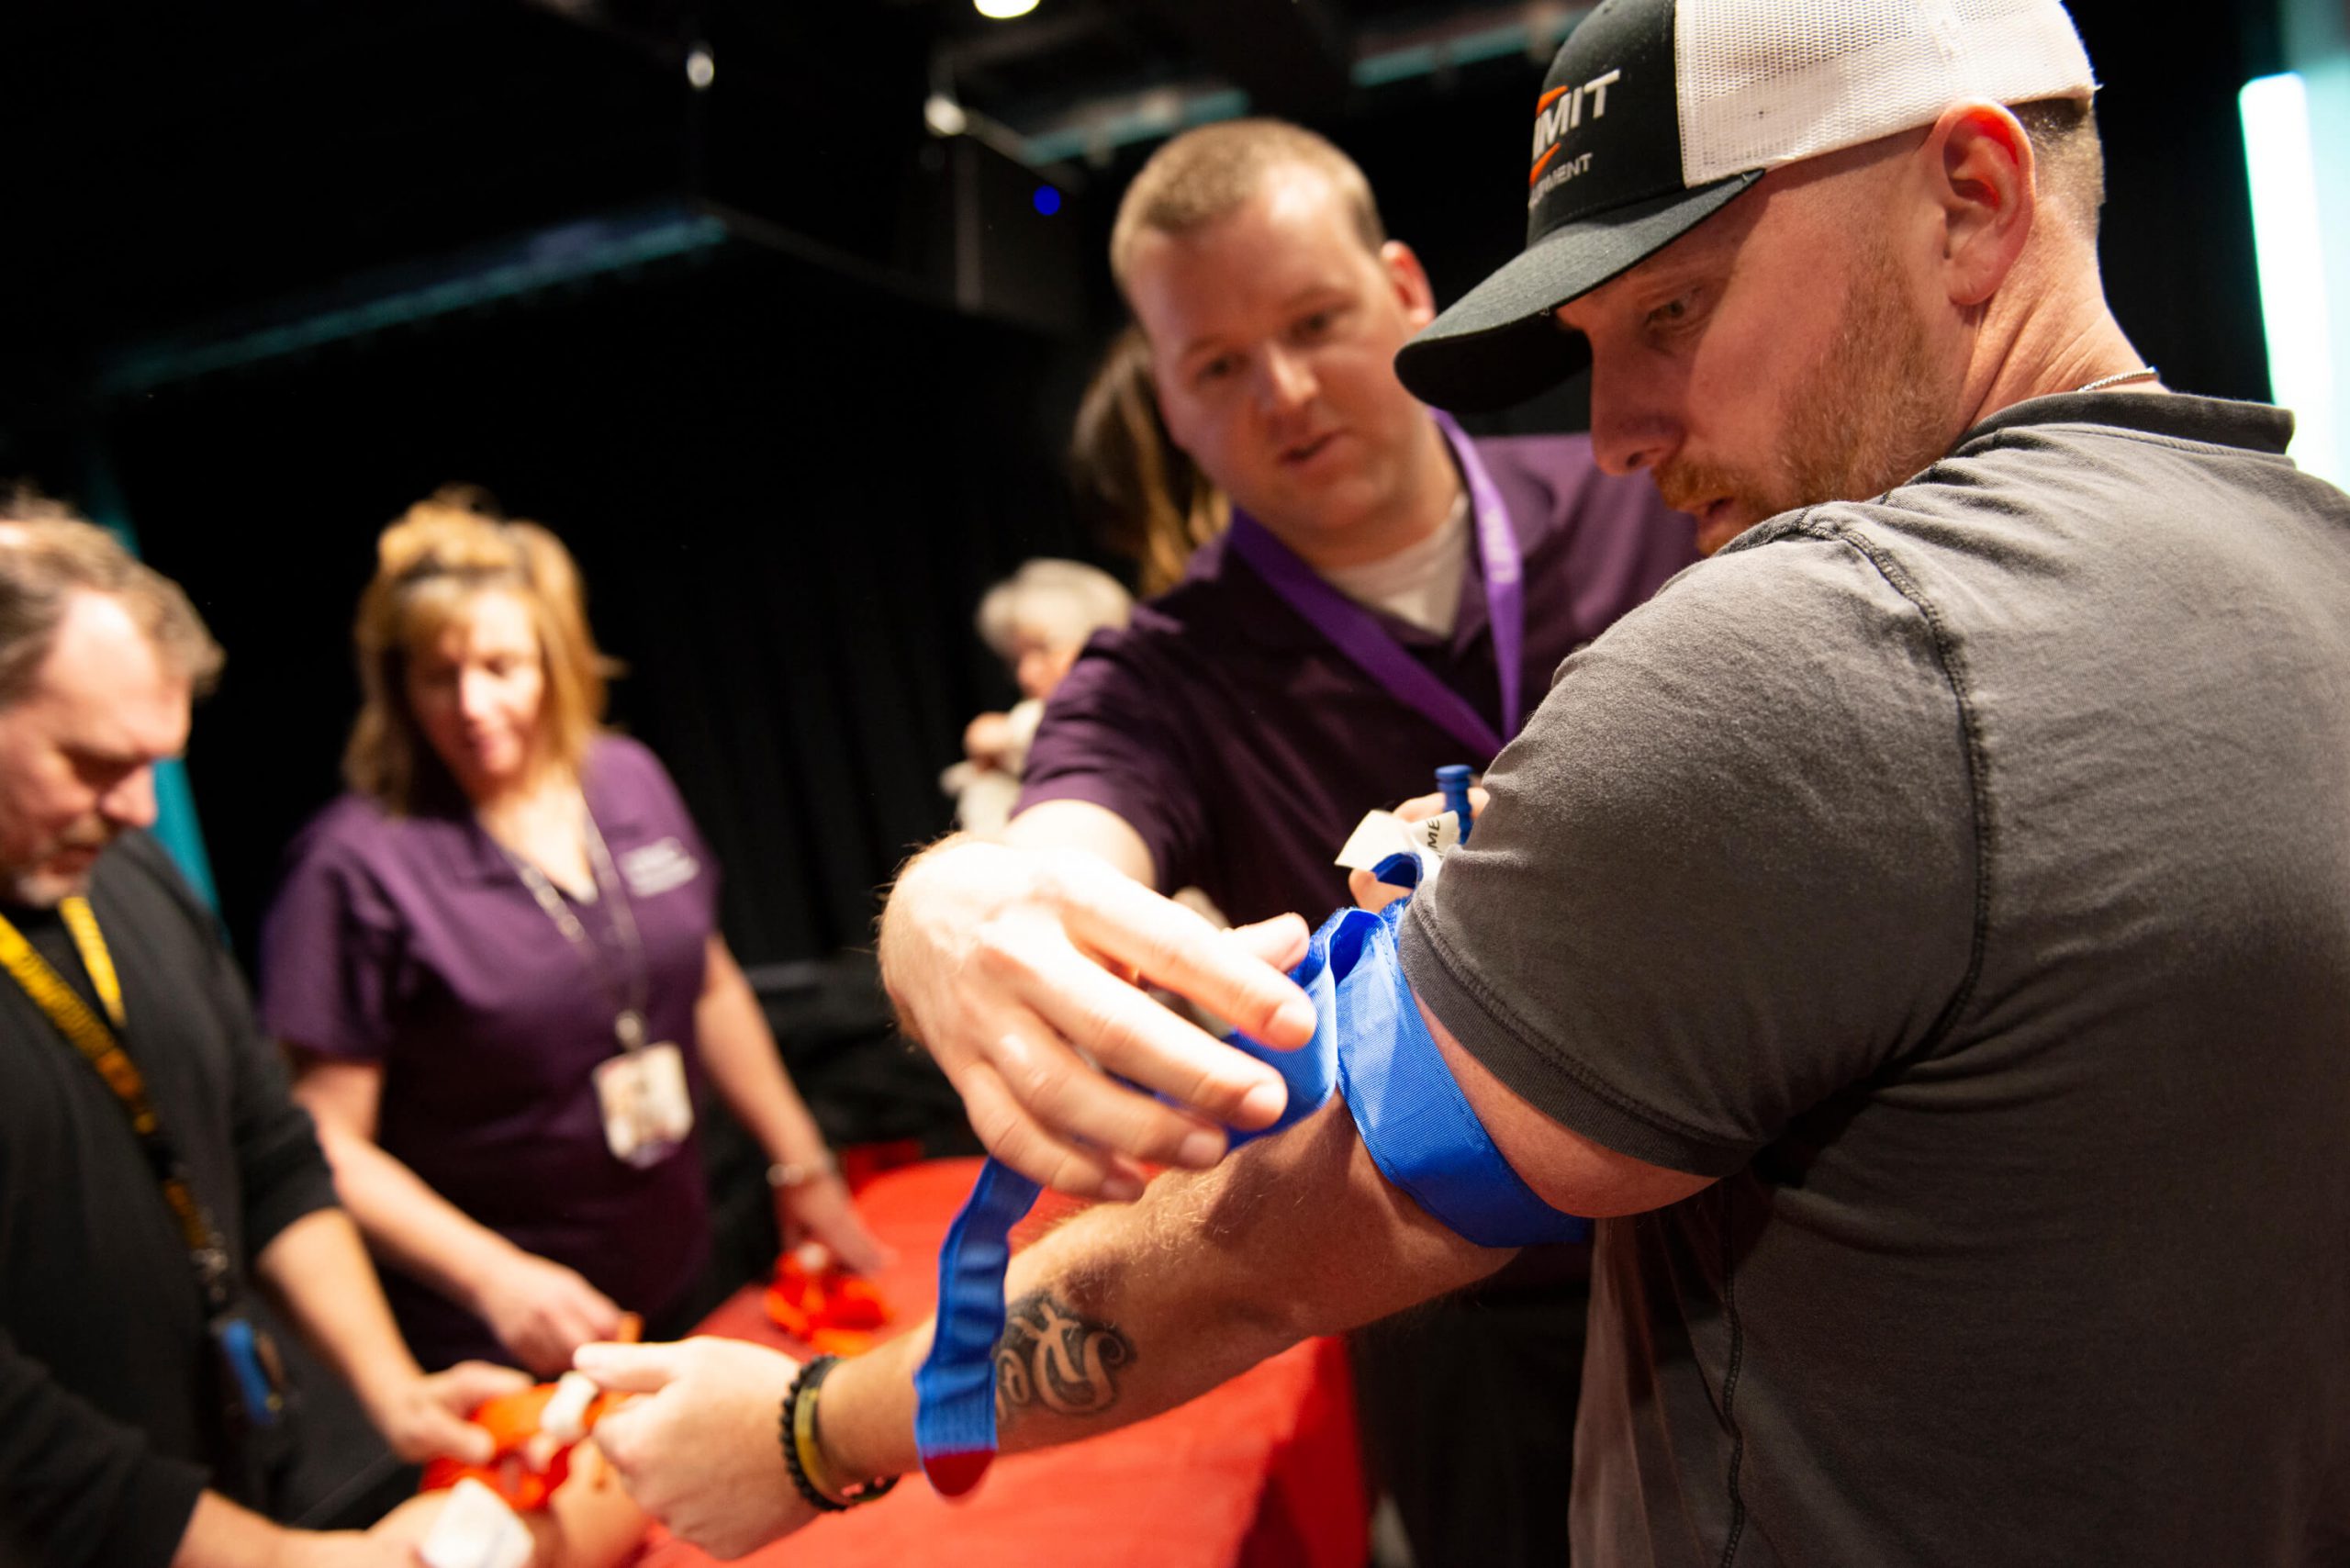 Man adjusting an arm band to teach life saving techniques at an iHeartRadio event.